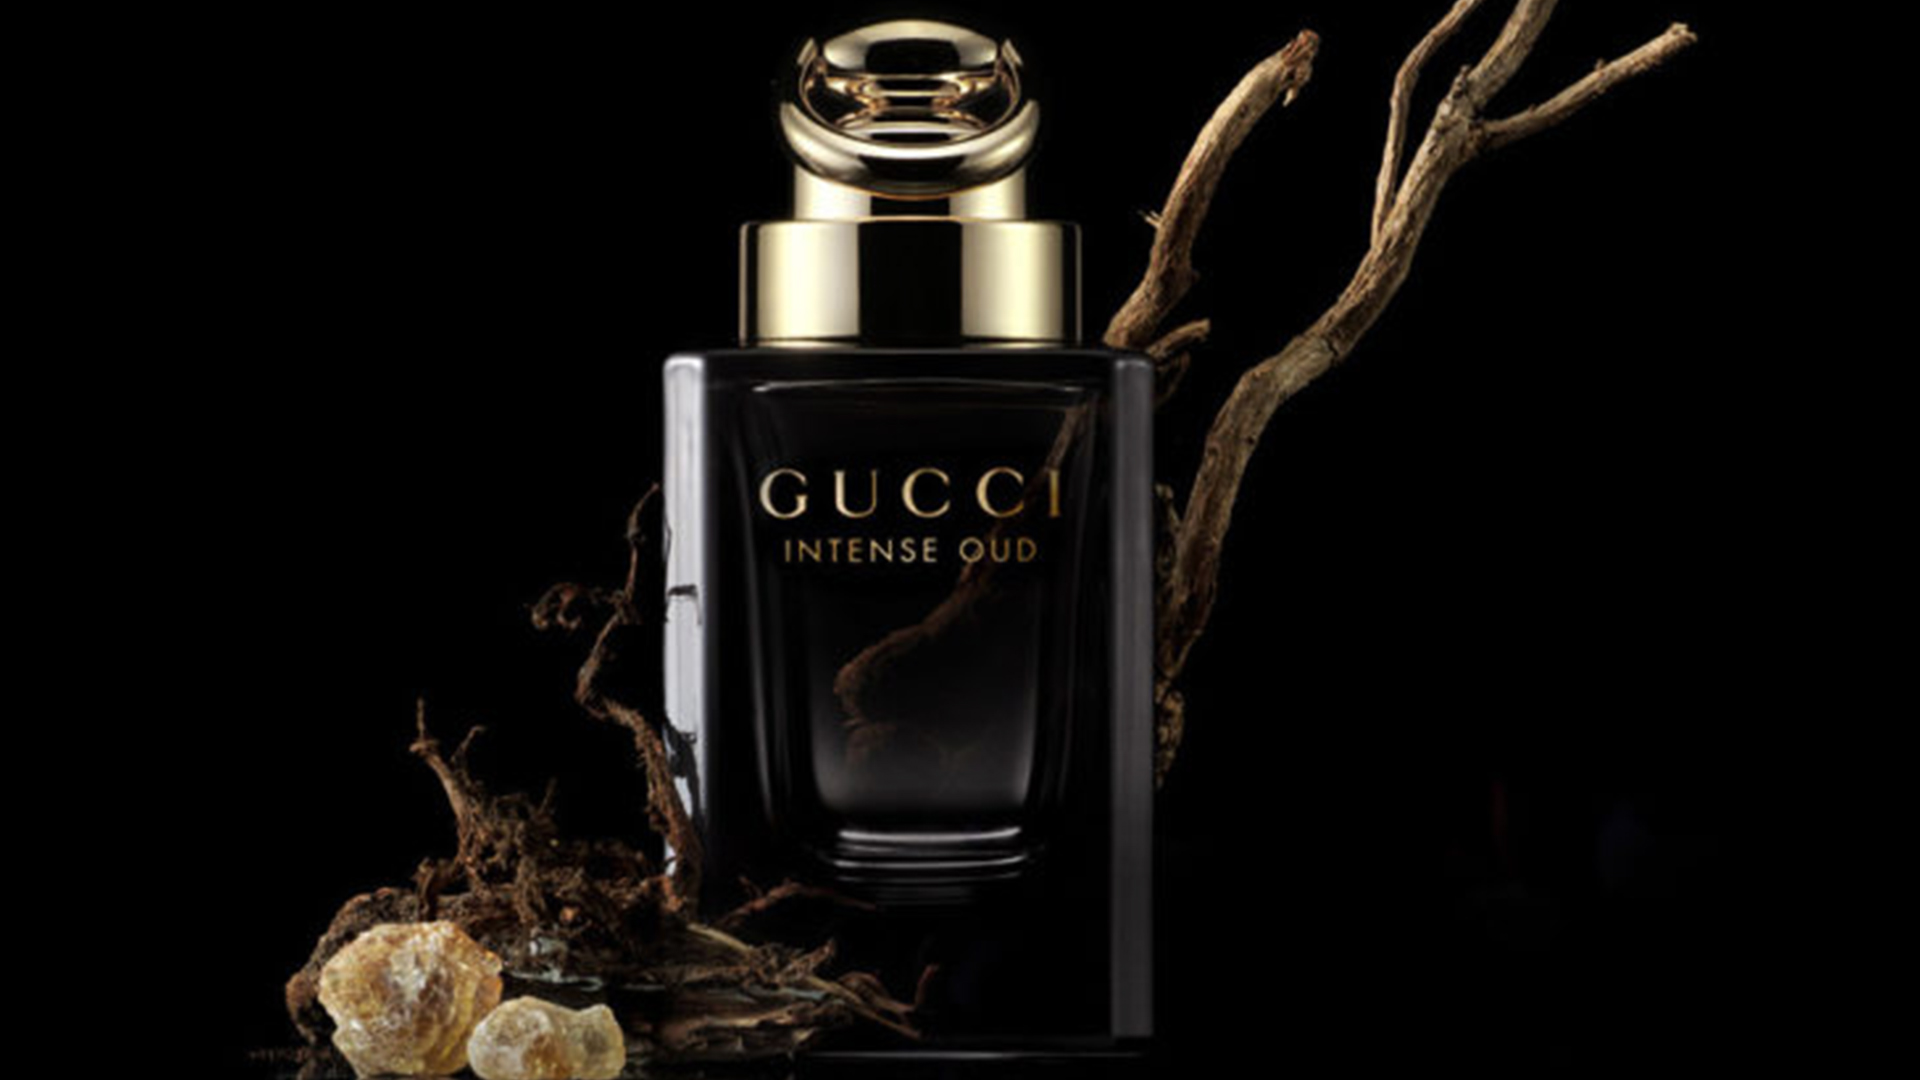 Intense Oud Gucci for women and men GUCCI-INTENSE-OUD-Feature.jpg